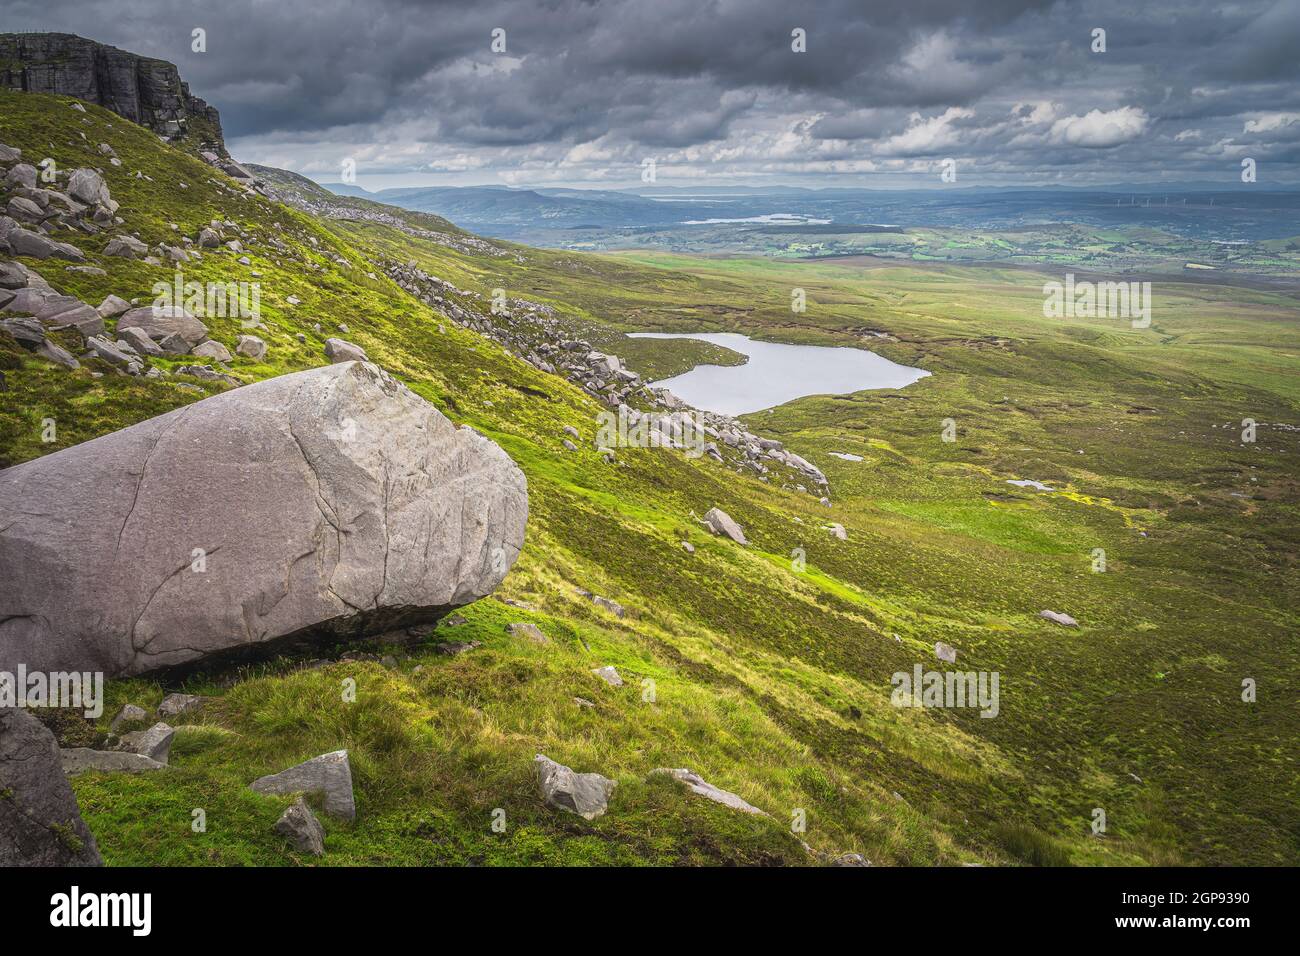 Large boulder and rubble on Cuilcagh Mountain mountainside, small lake in valley below and dramatic, stormy sky in background, Northern Ireland Stock Photo